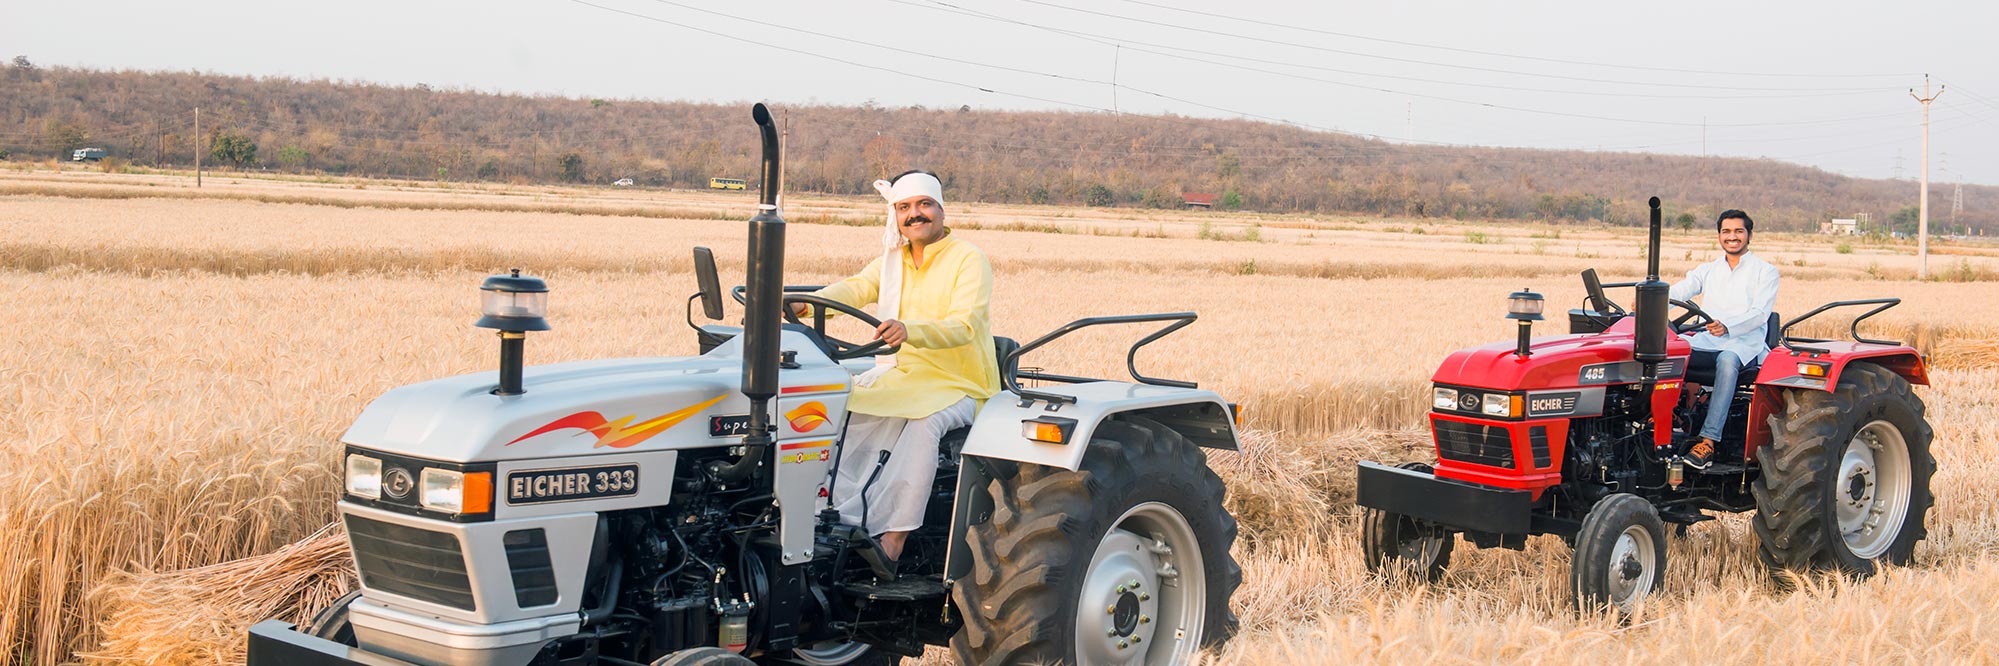 TAFE offers free tractor rental for small farmers of Uttar Pradesh during COVID-19